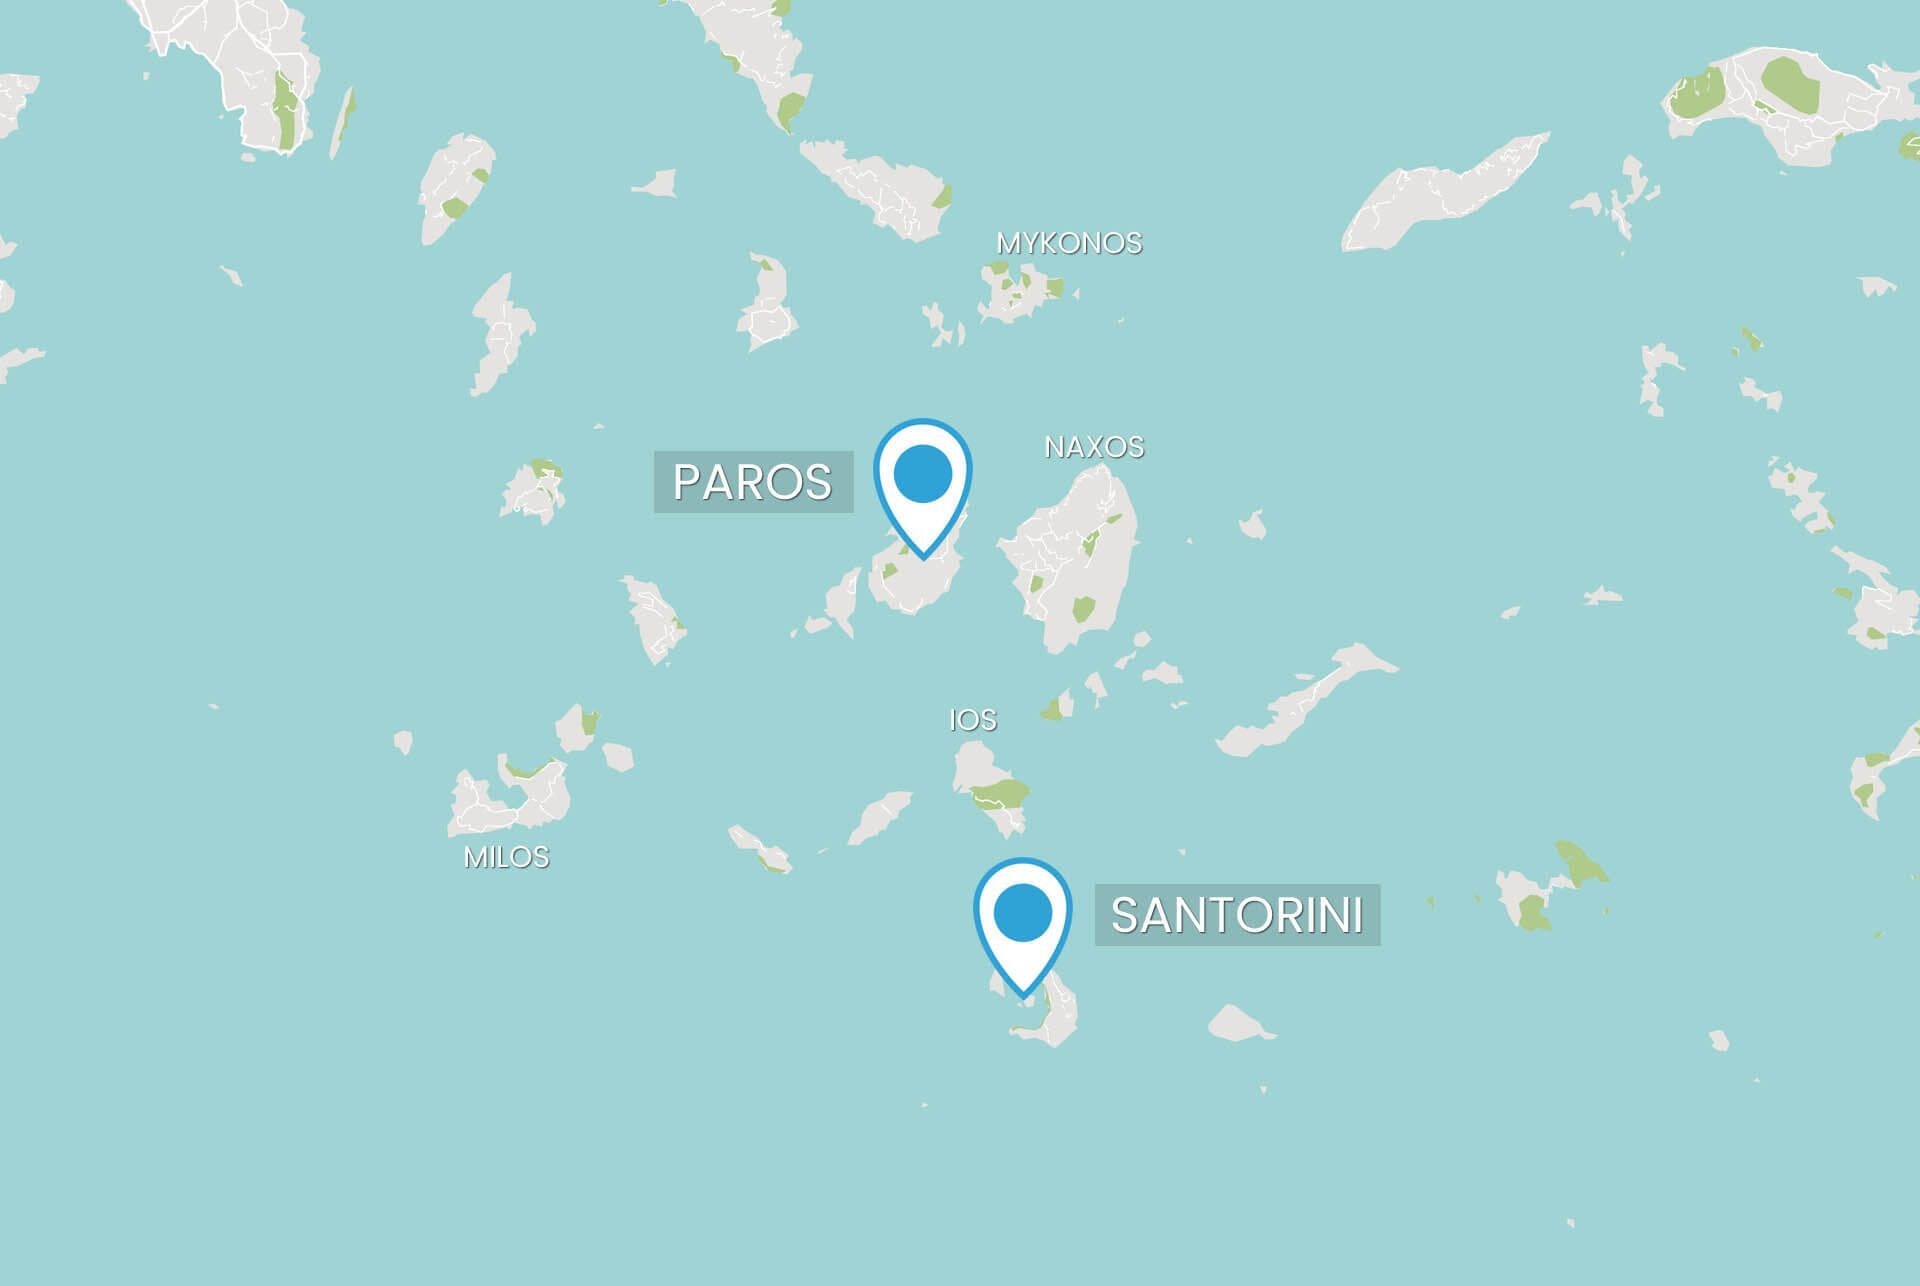 distance from athens to paros by ferry